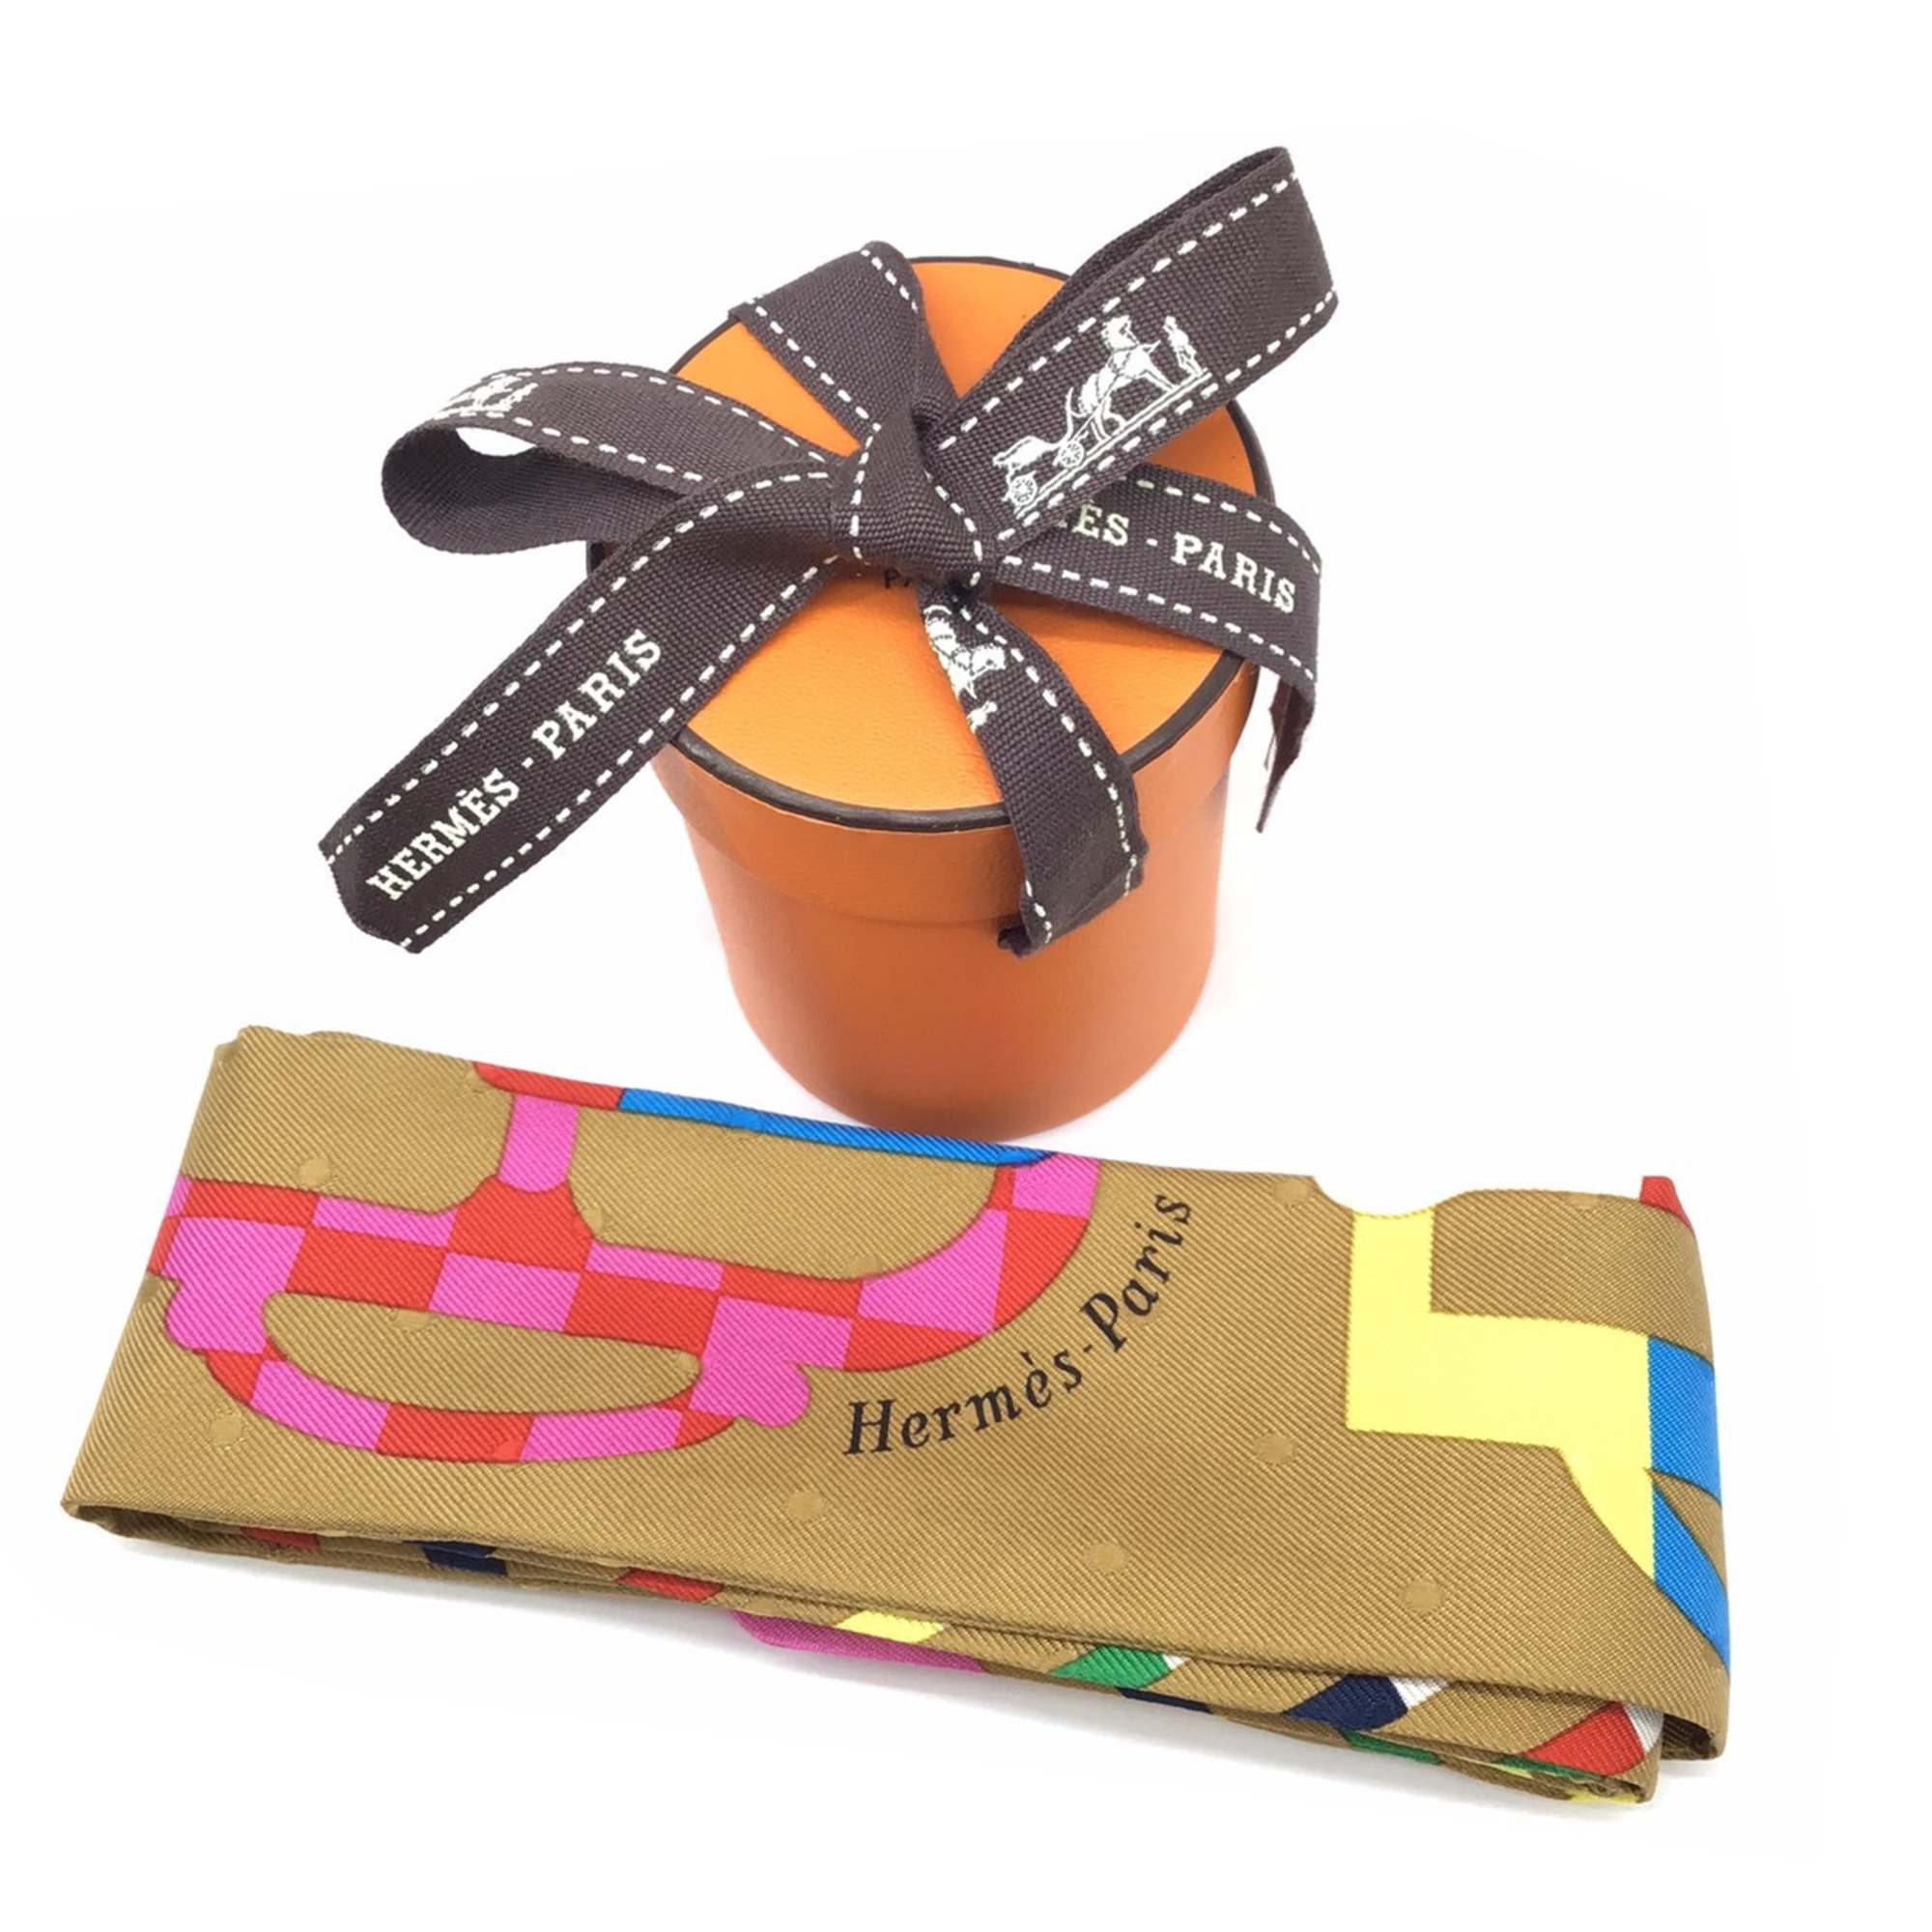 HERMES Twilly Moderne Buckle Bouclerie moderne Multicolor Brown Dot Stripe Scarf Women's Men's Unisex Wrapping